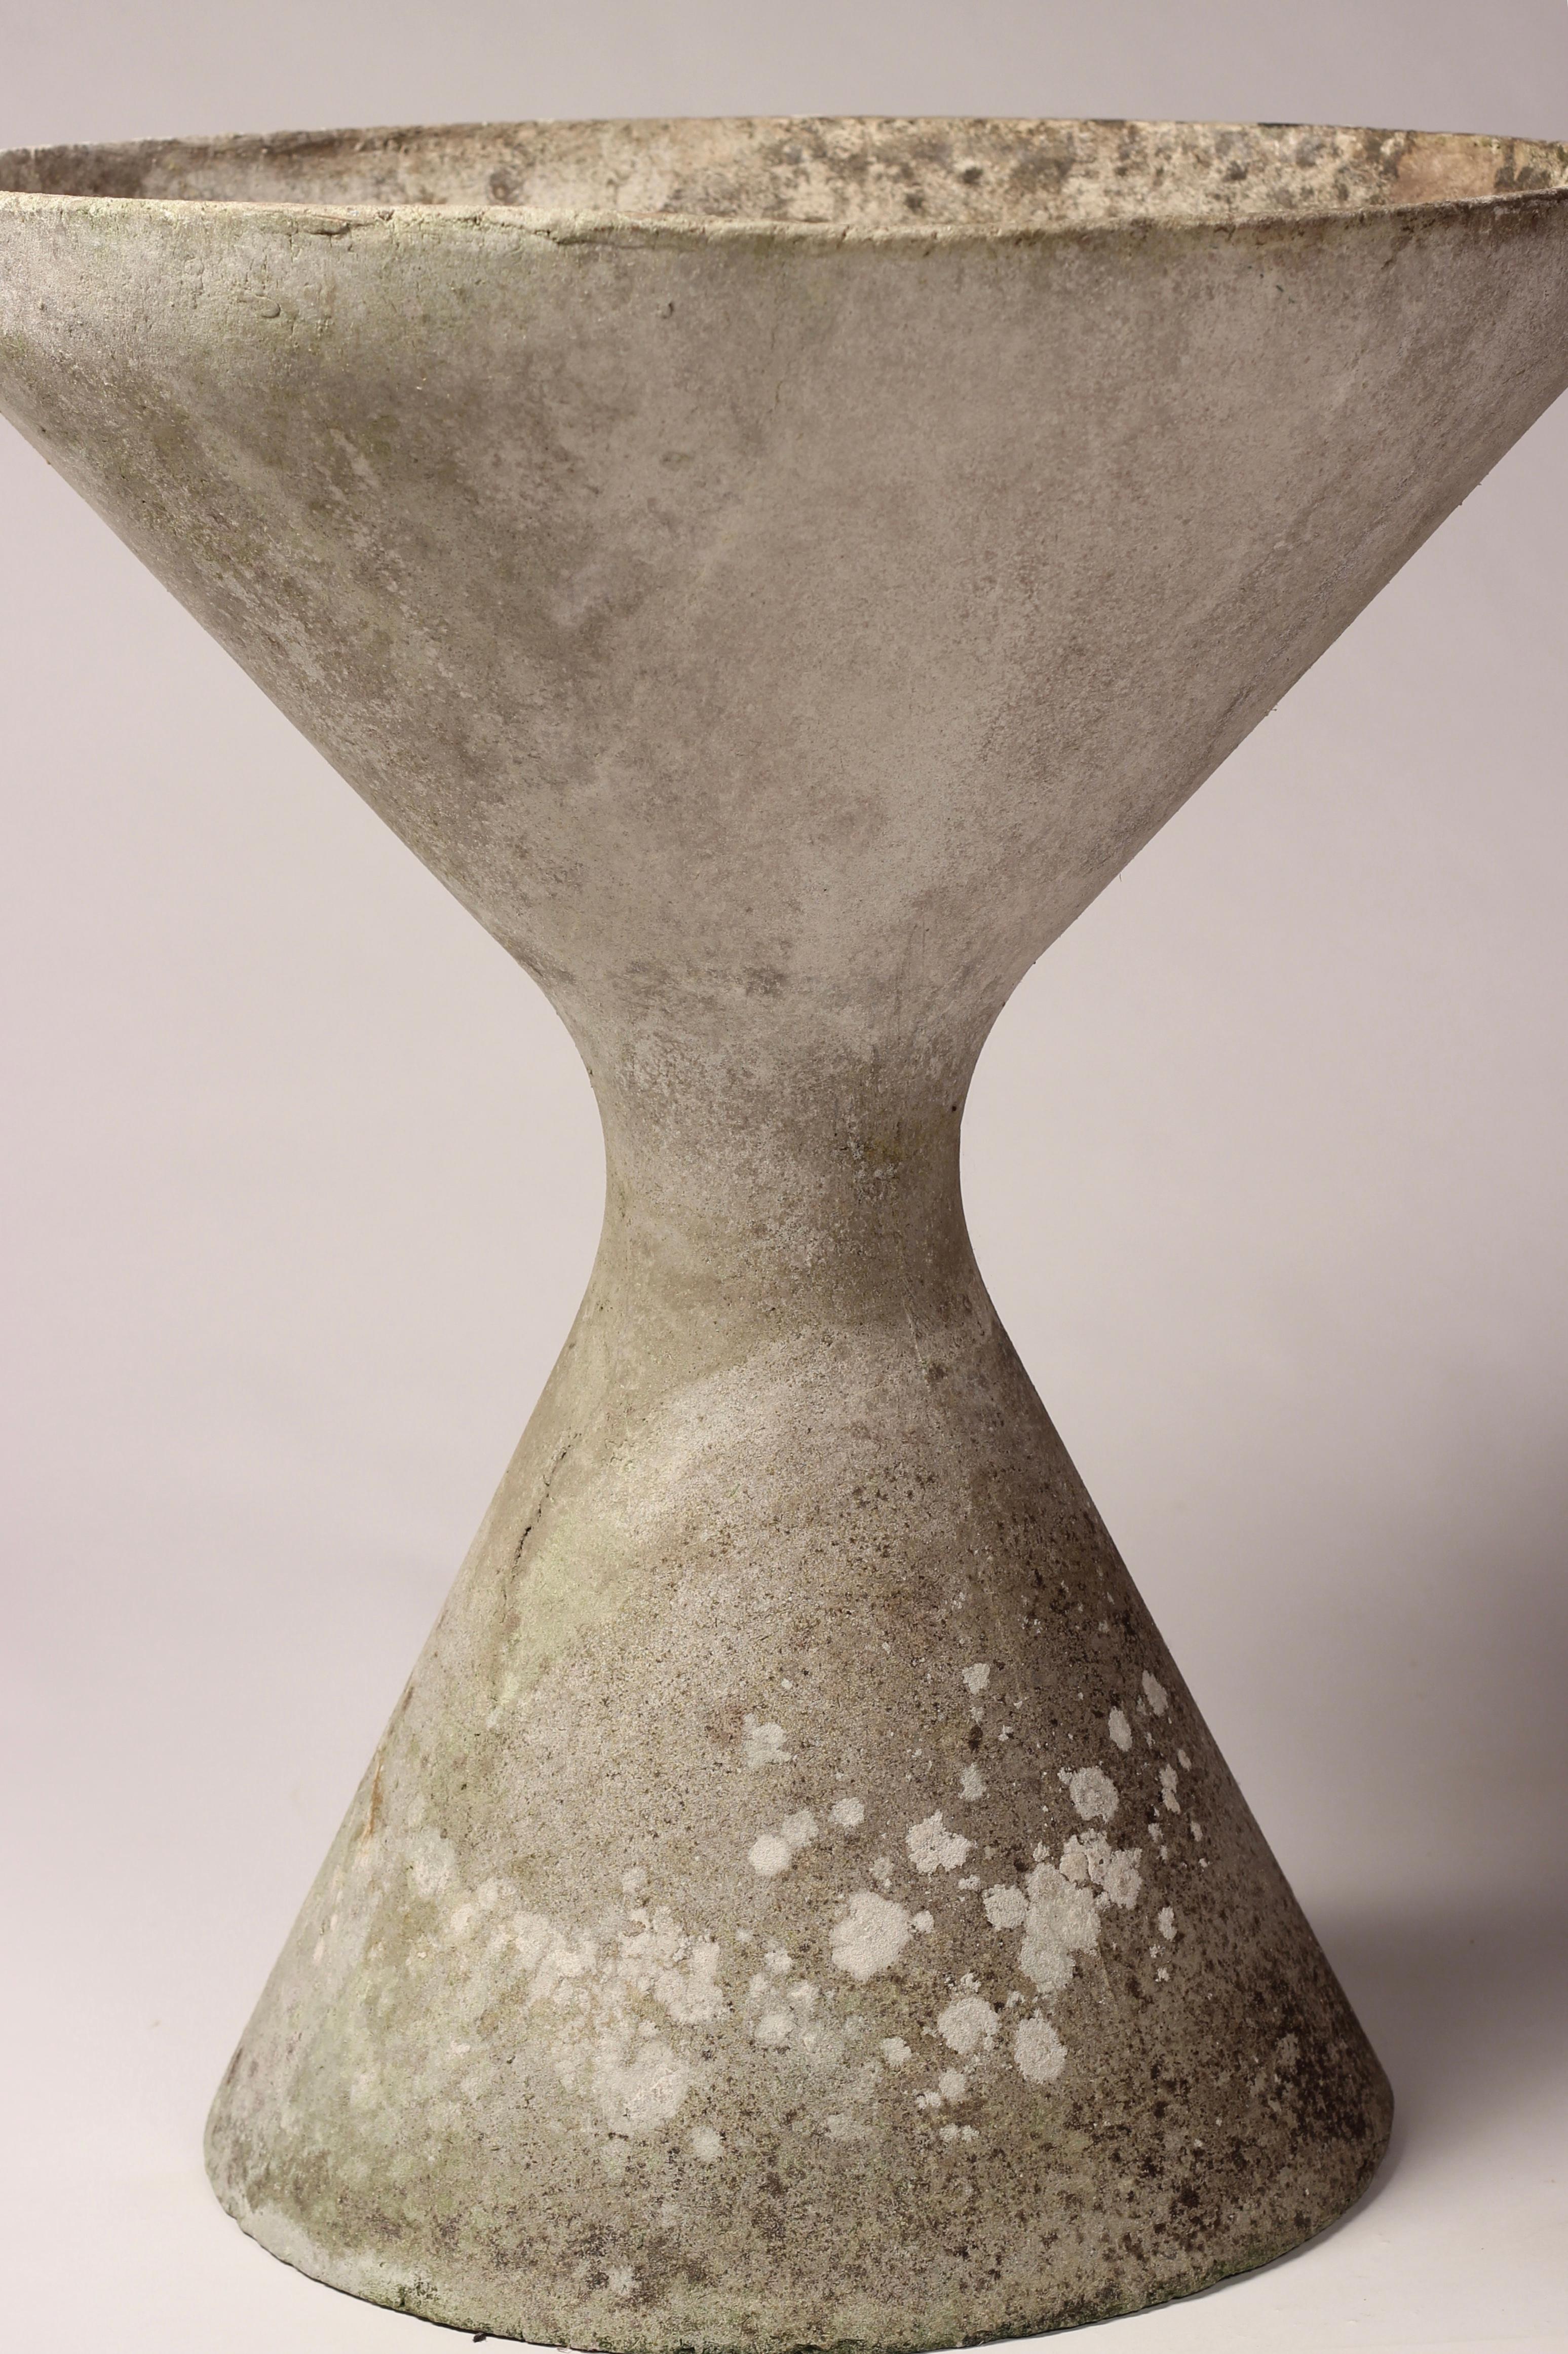 Showing close to 60’s year of Patina, this wonderful example of a concrete Hourglass planter has improved in character with age. Perfect for sculptural or trailing plants, indoors or outdoors. It also be inverted to give you a second option for a